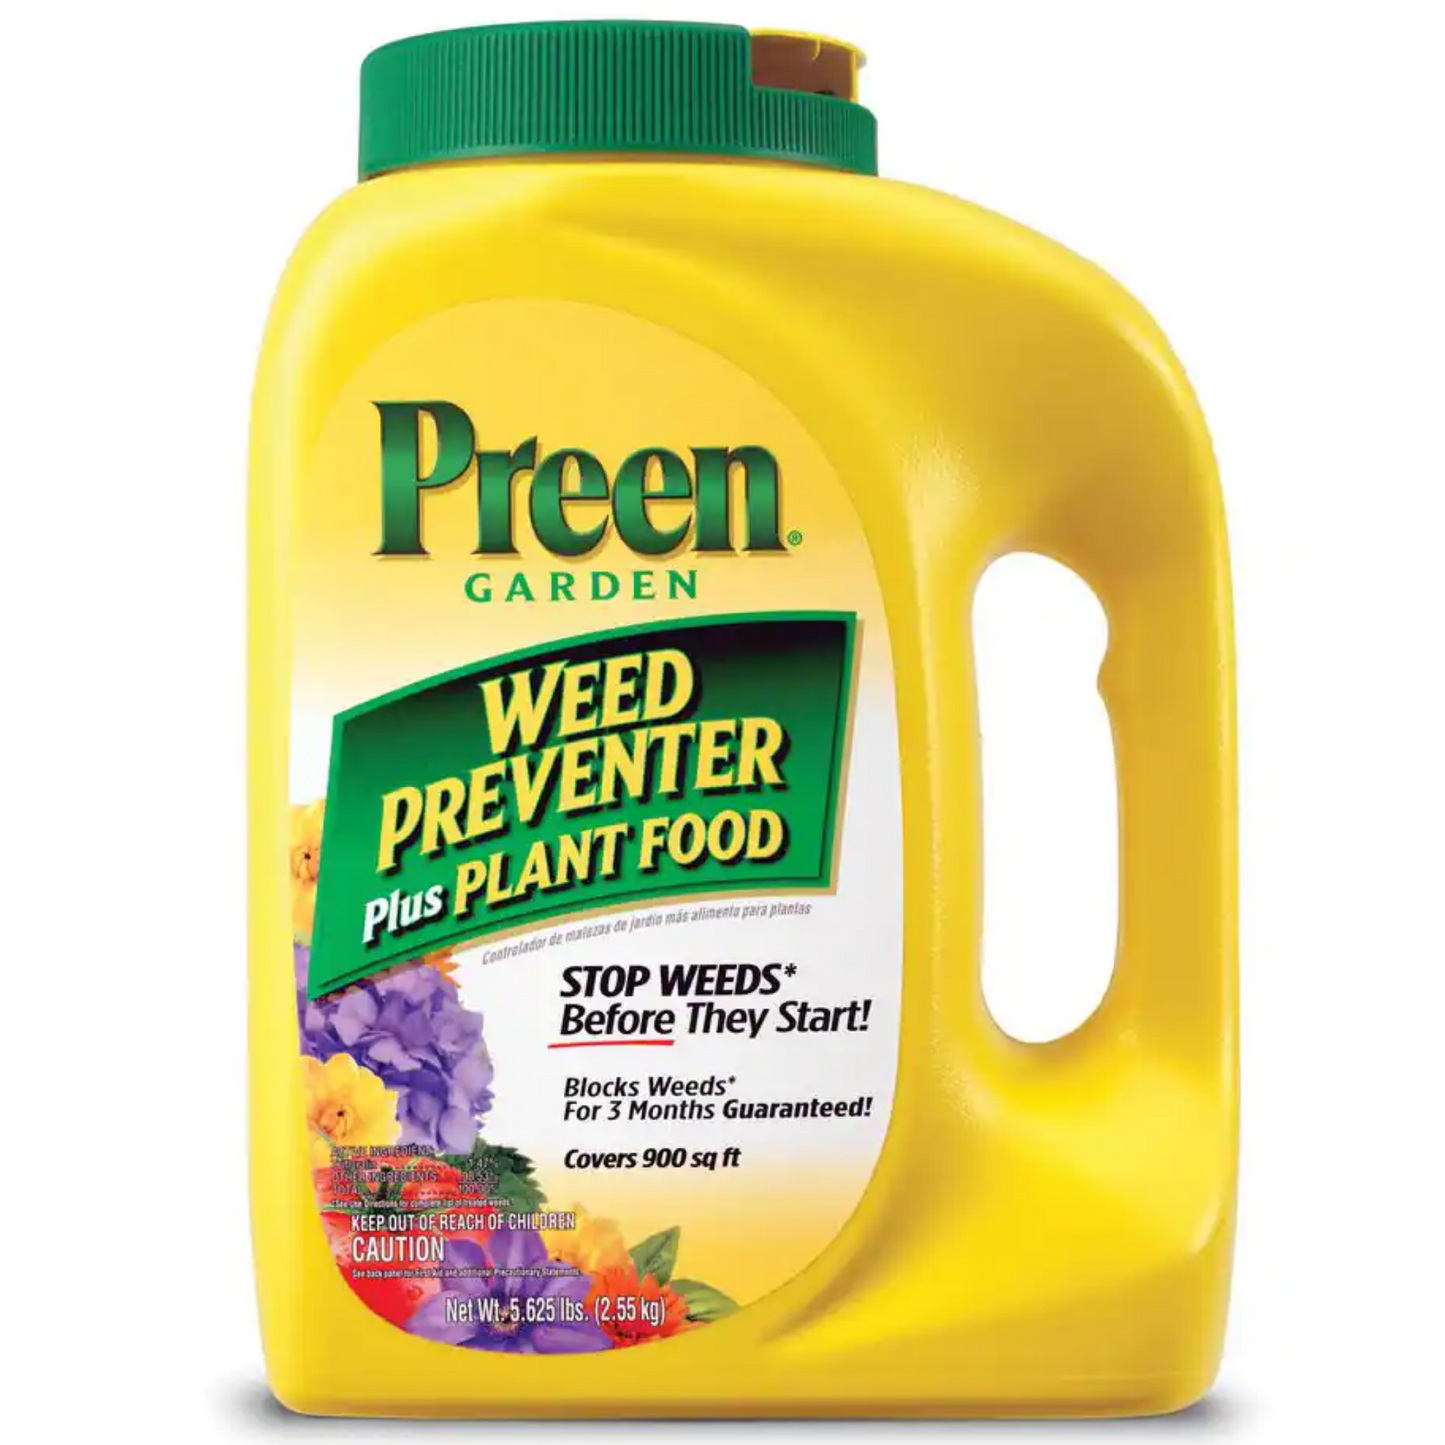 Preen 5.62# 900SF Garden Weed Prevent Plant Food